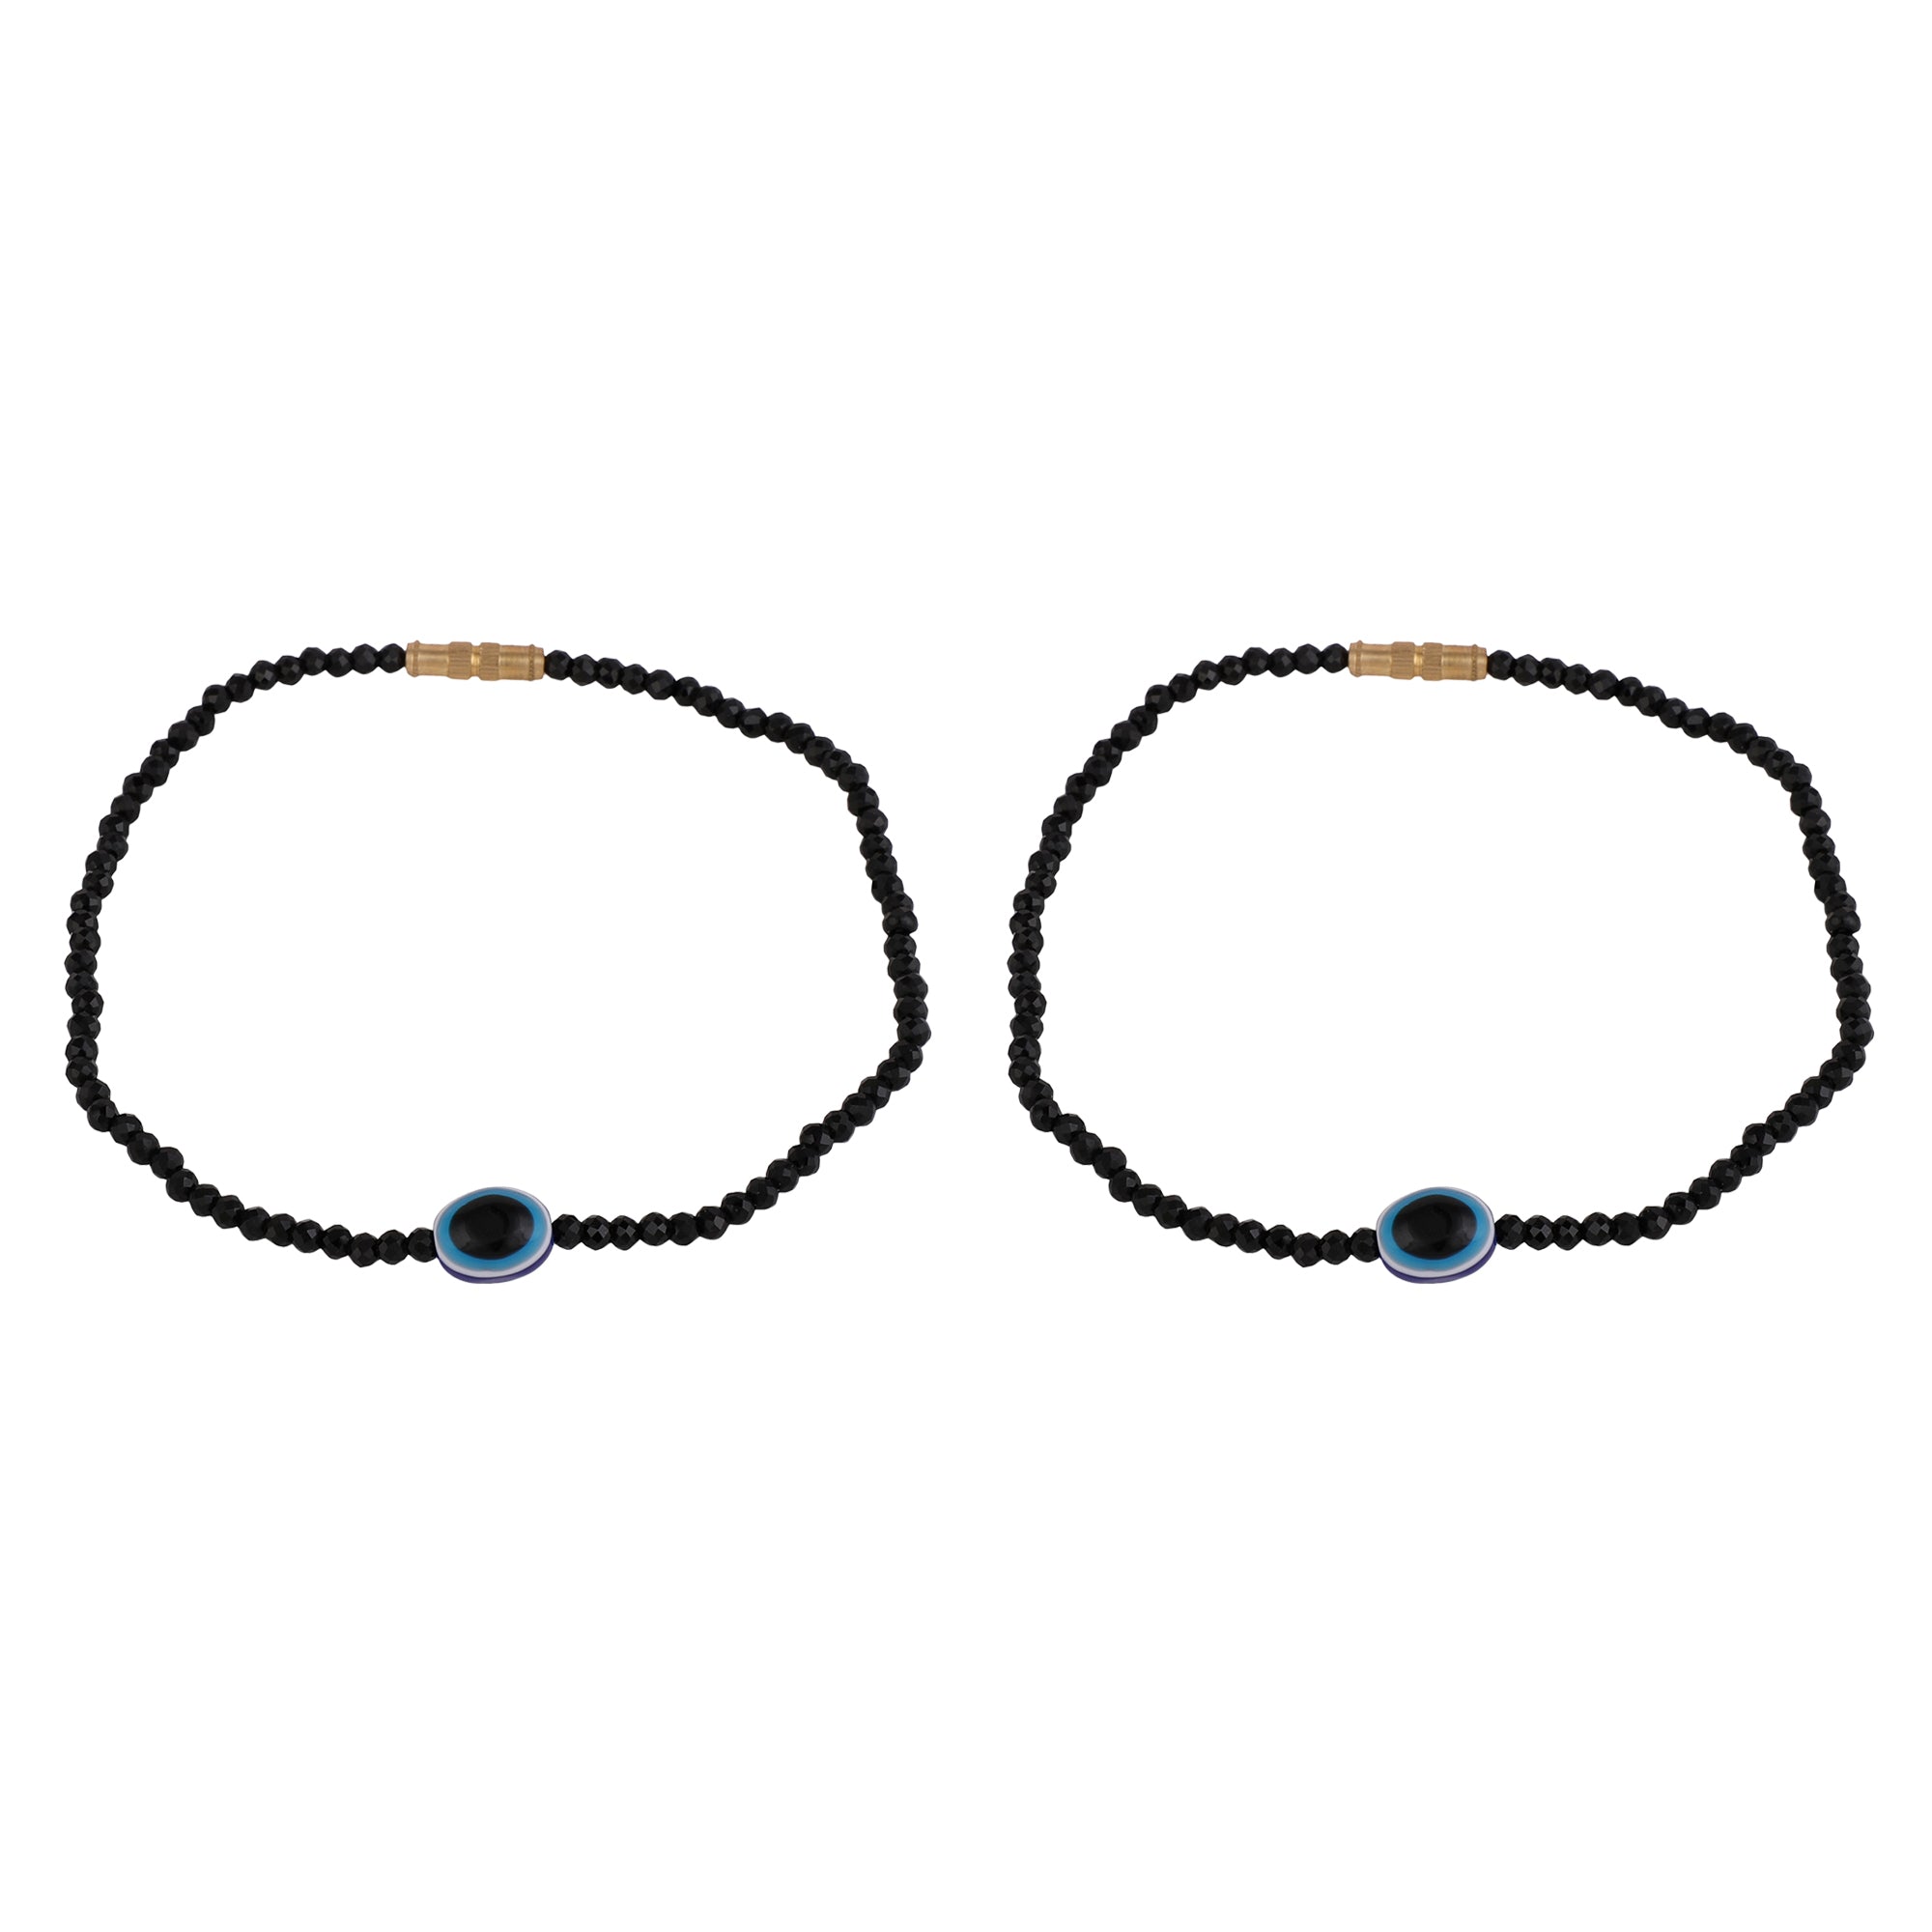 Women's Contemporary Evil Eye Black Beads Anklets - MODE MANIA